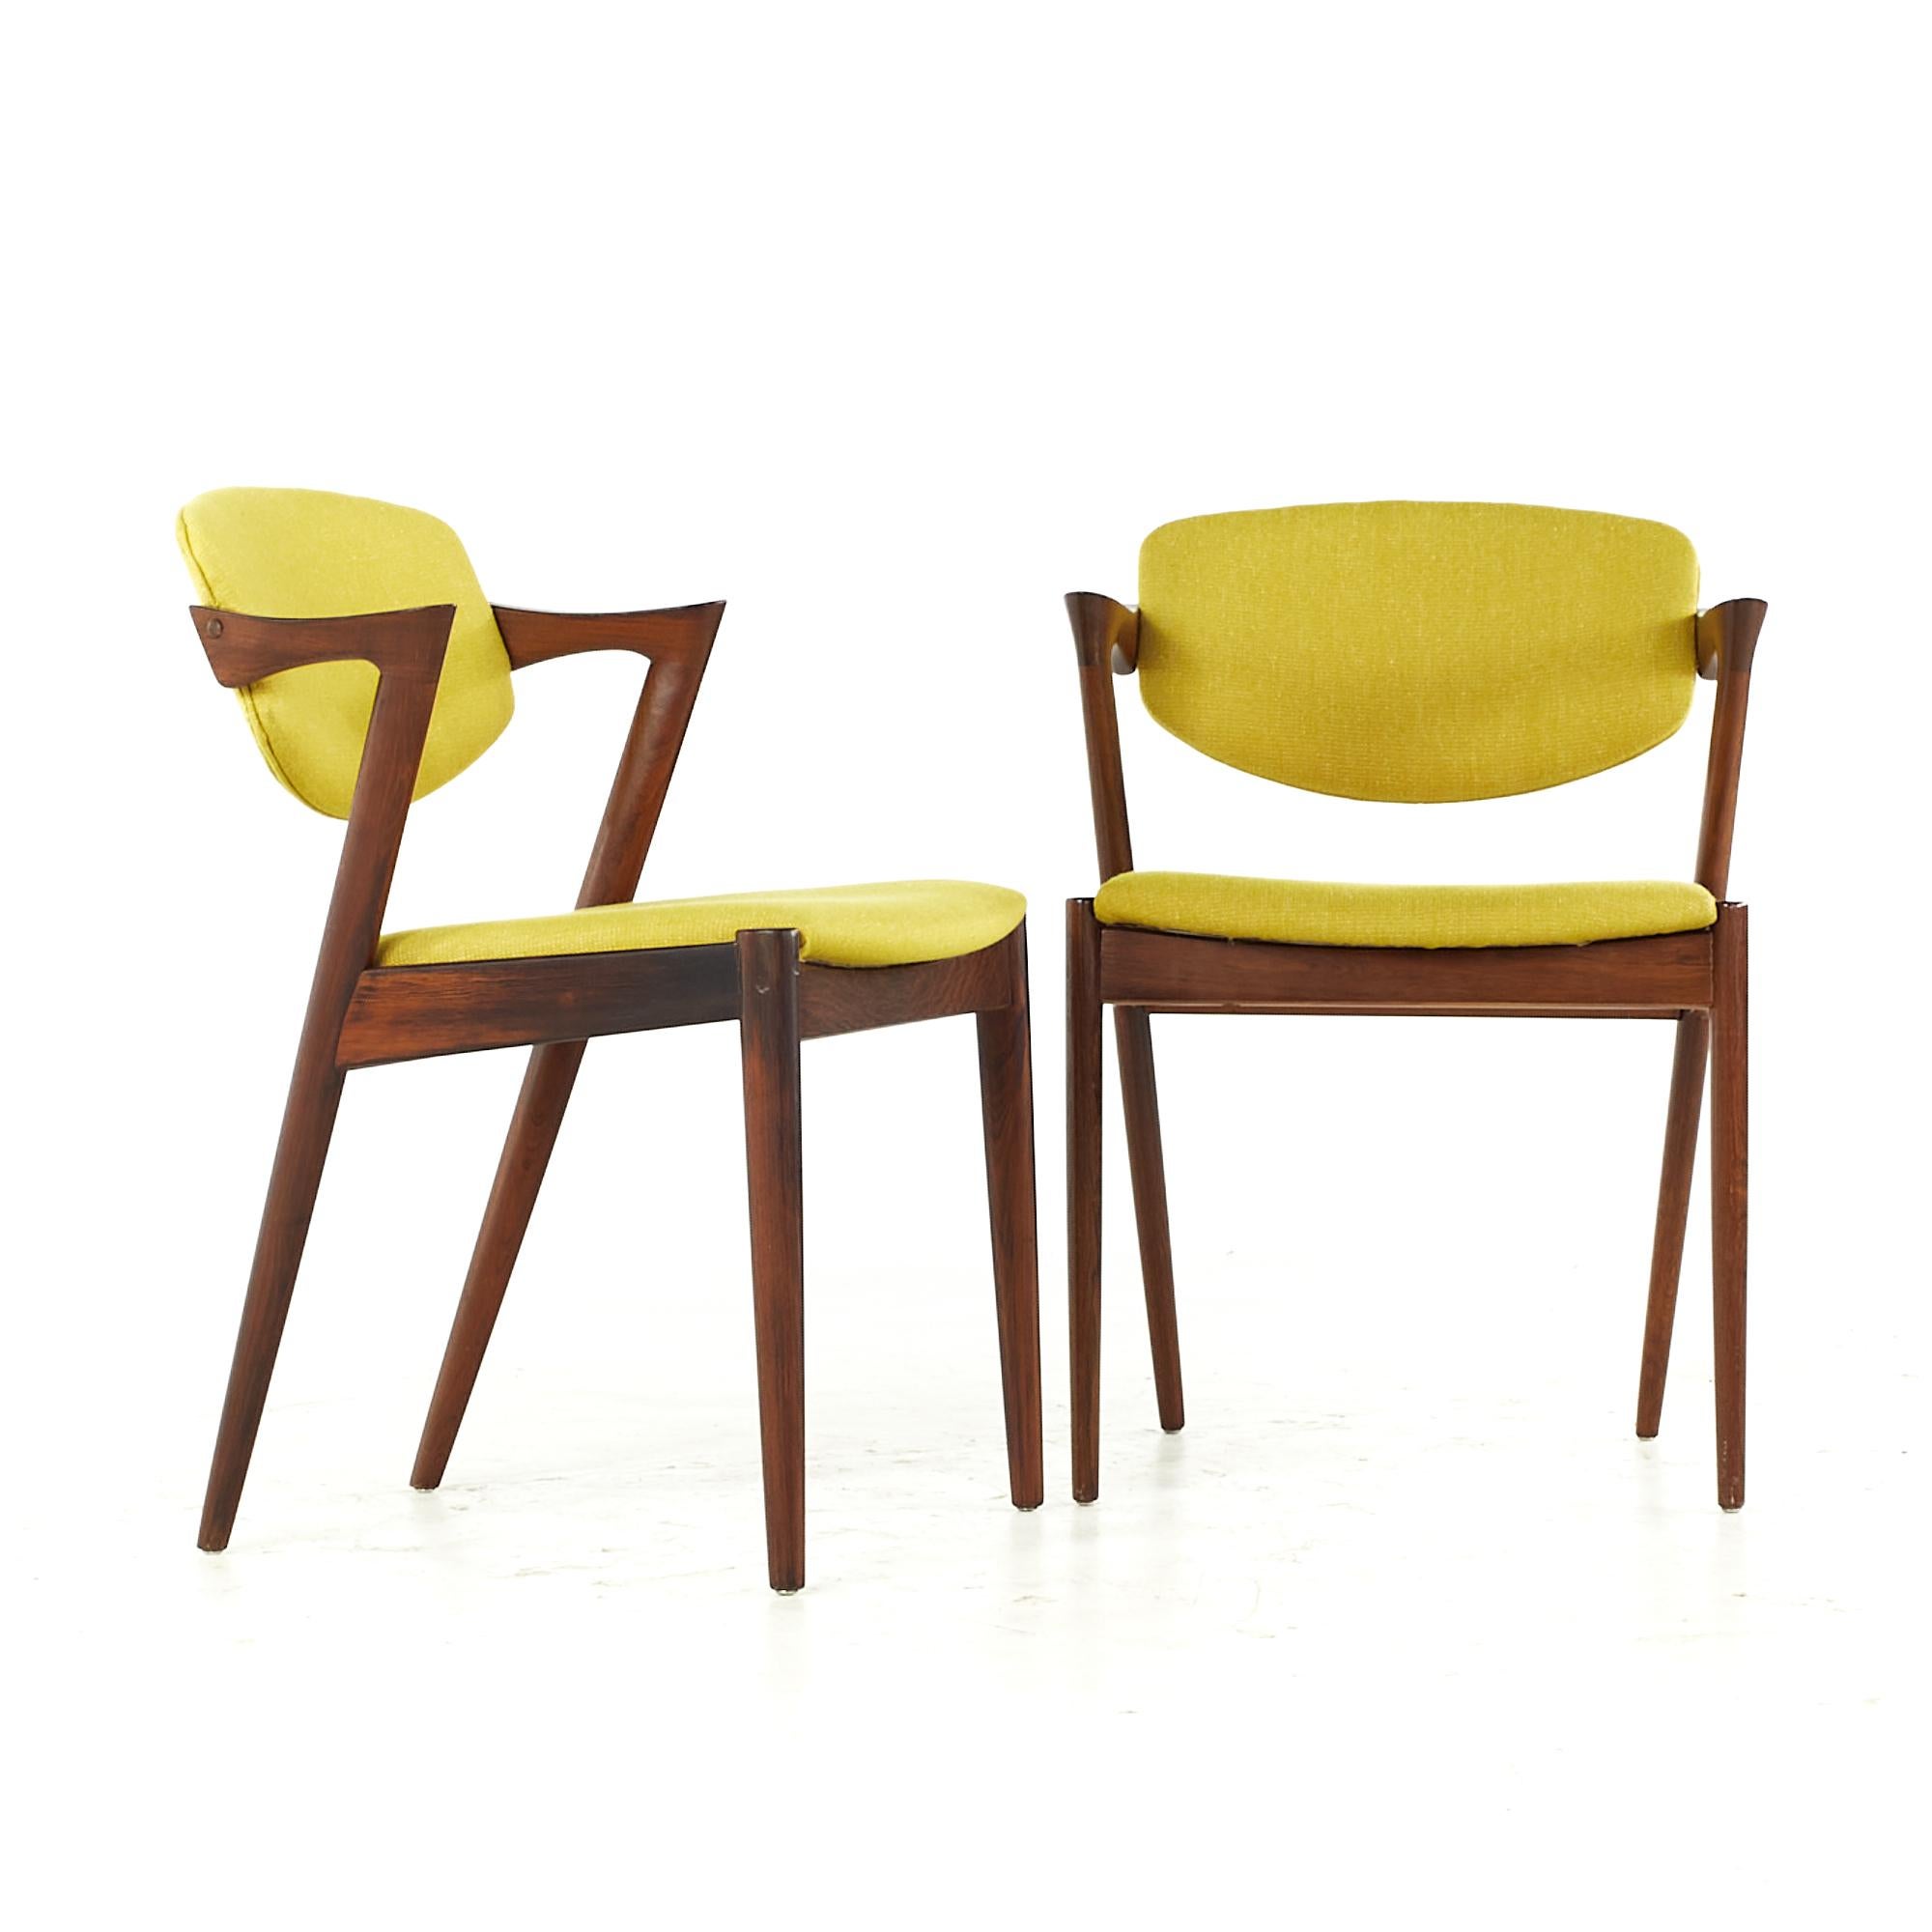 Kai Kristiansen midcentury Rosewood Z dining chairs - pair.

This chair measures: 19.75 wide x 19.25 deep x 29 high, with a seat height of 17.5 and arm height/chair clearance 26.5 inches.

All pieces of furniture can be had in what we call